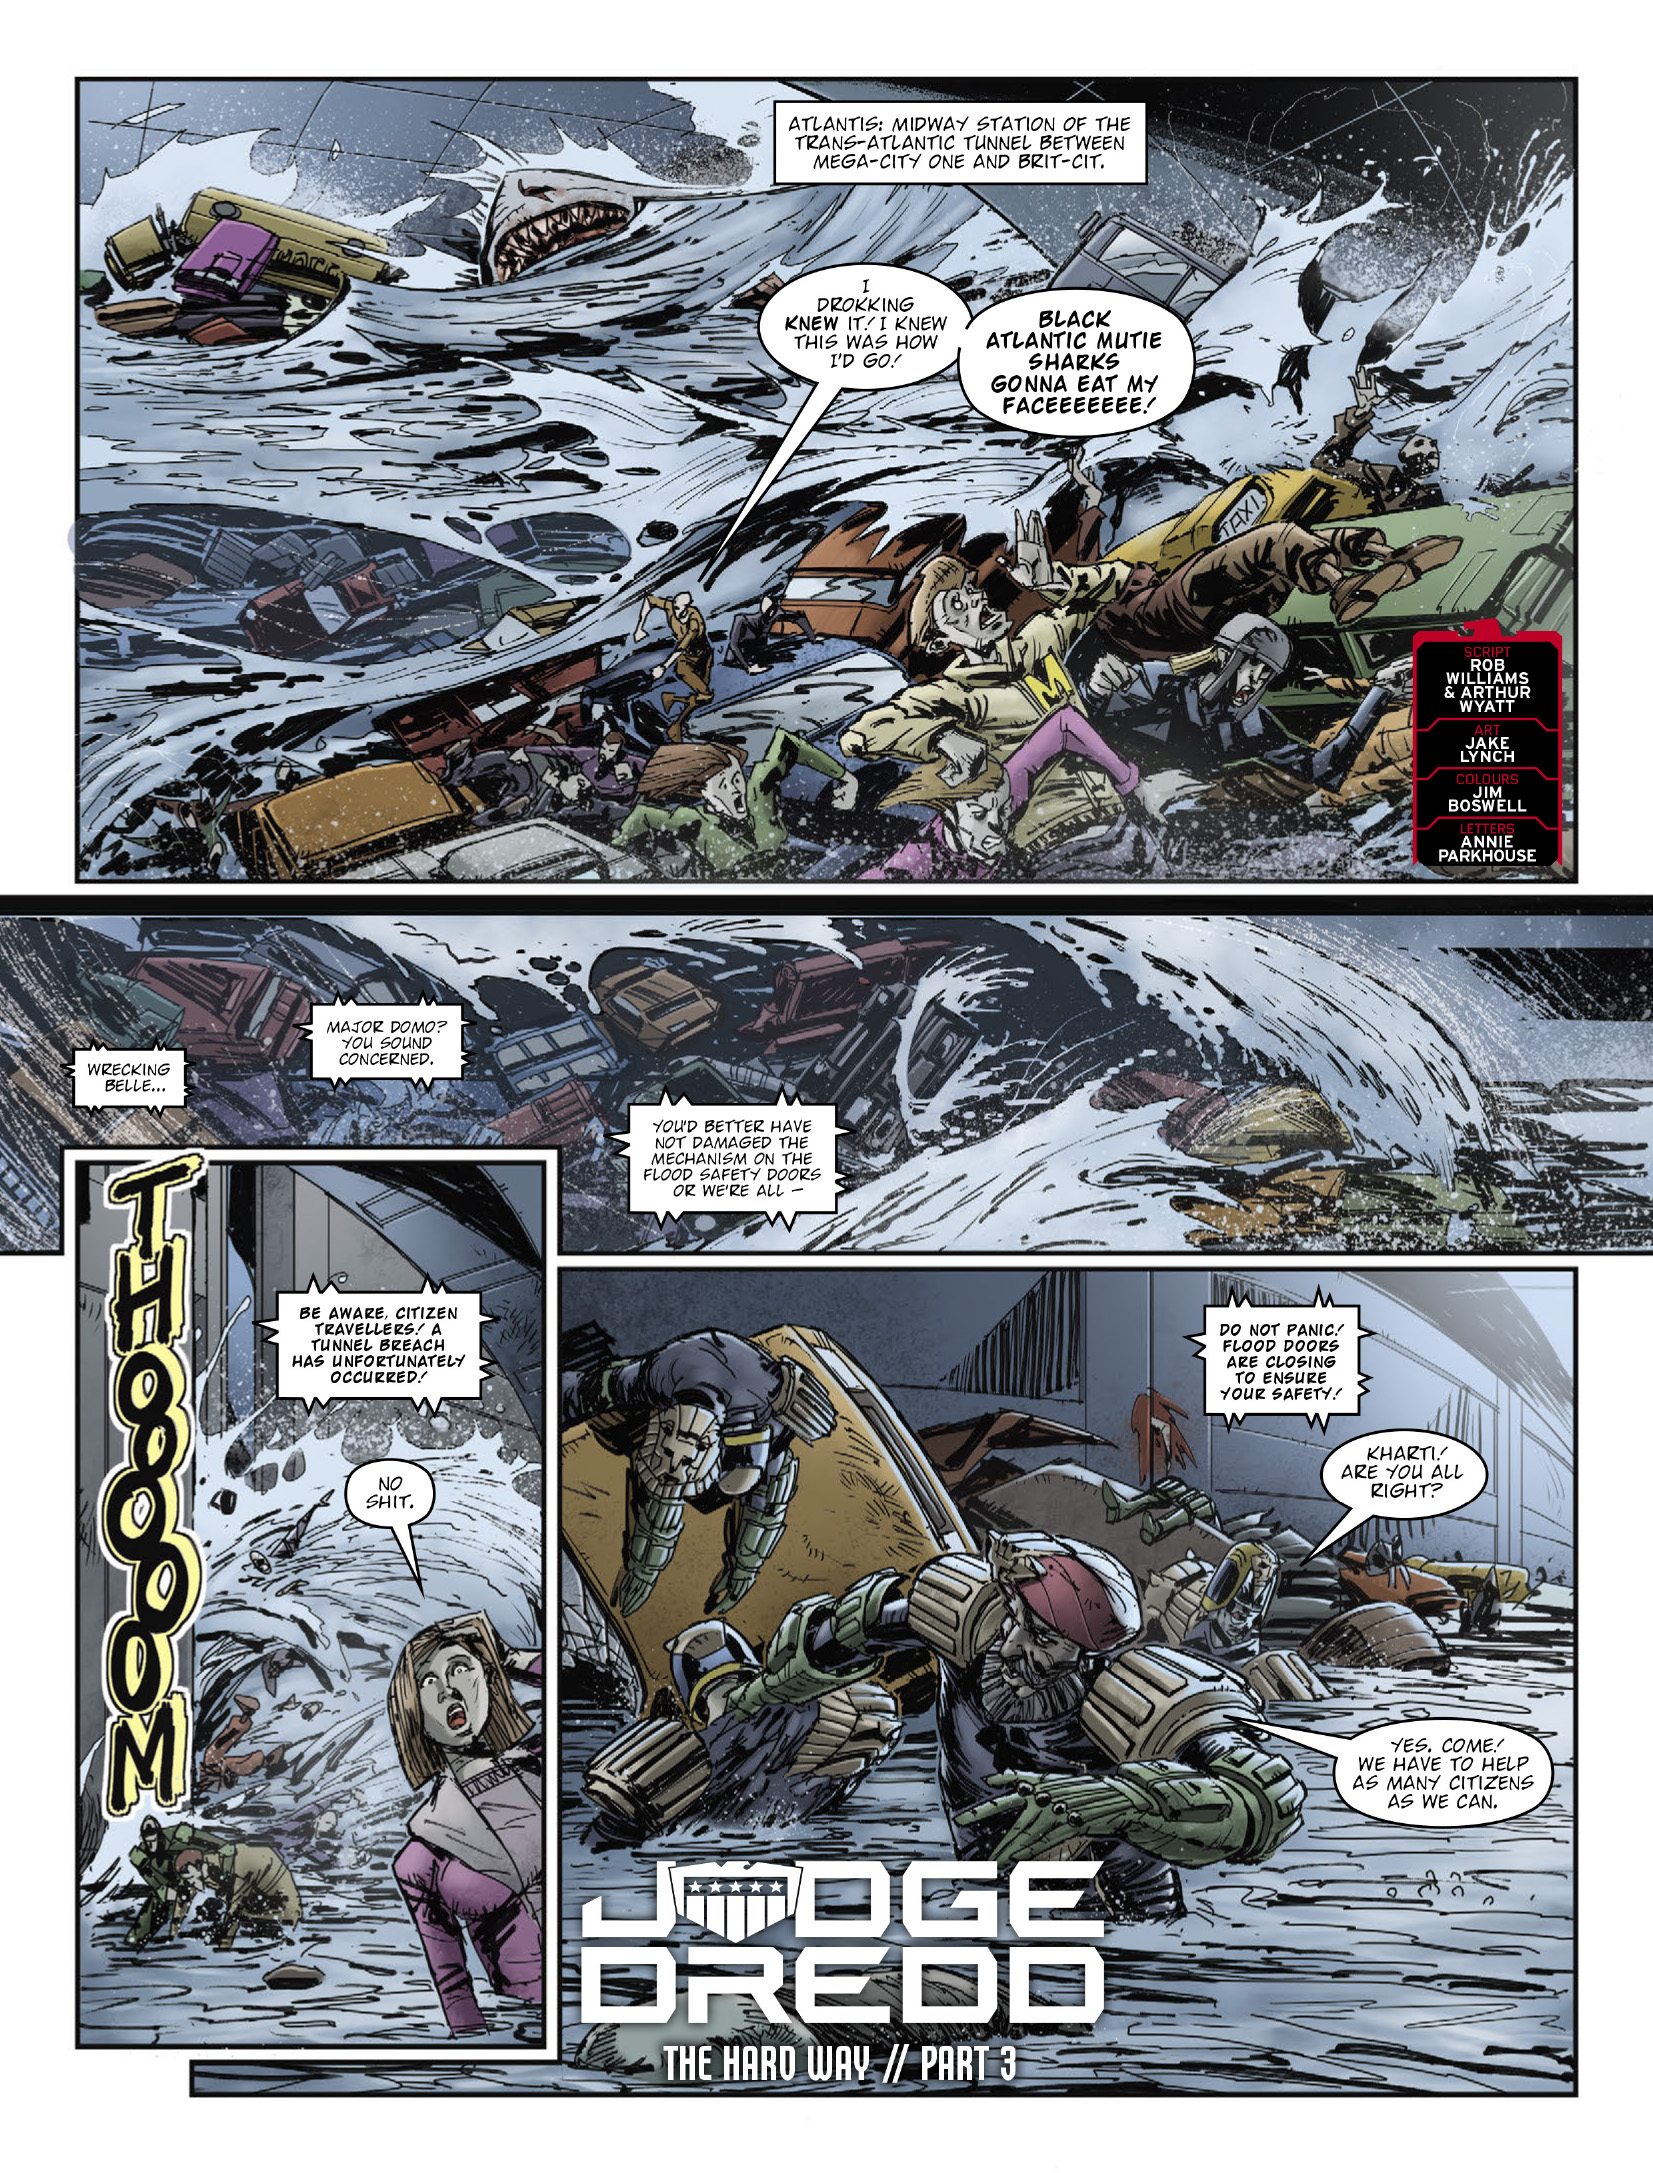 2000 AD: Chapter 2252 - Page 3